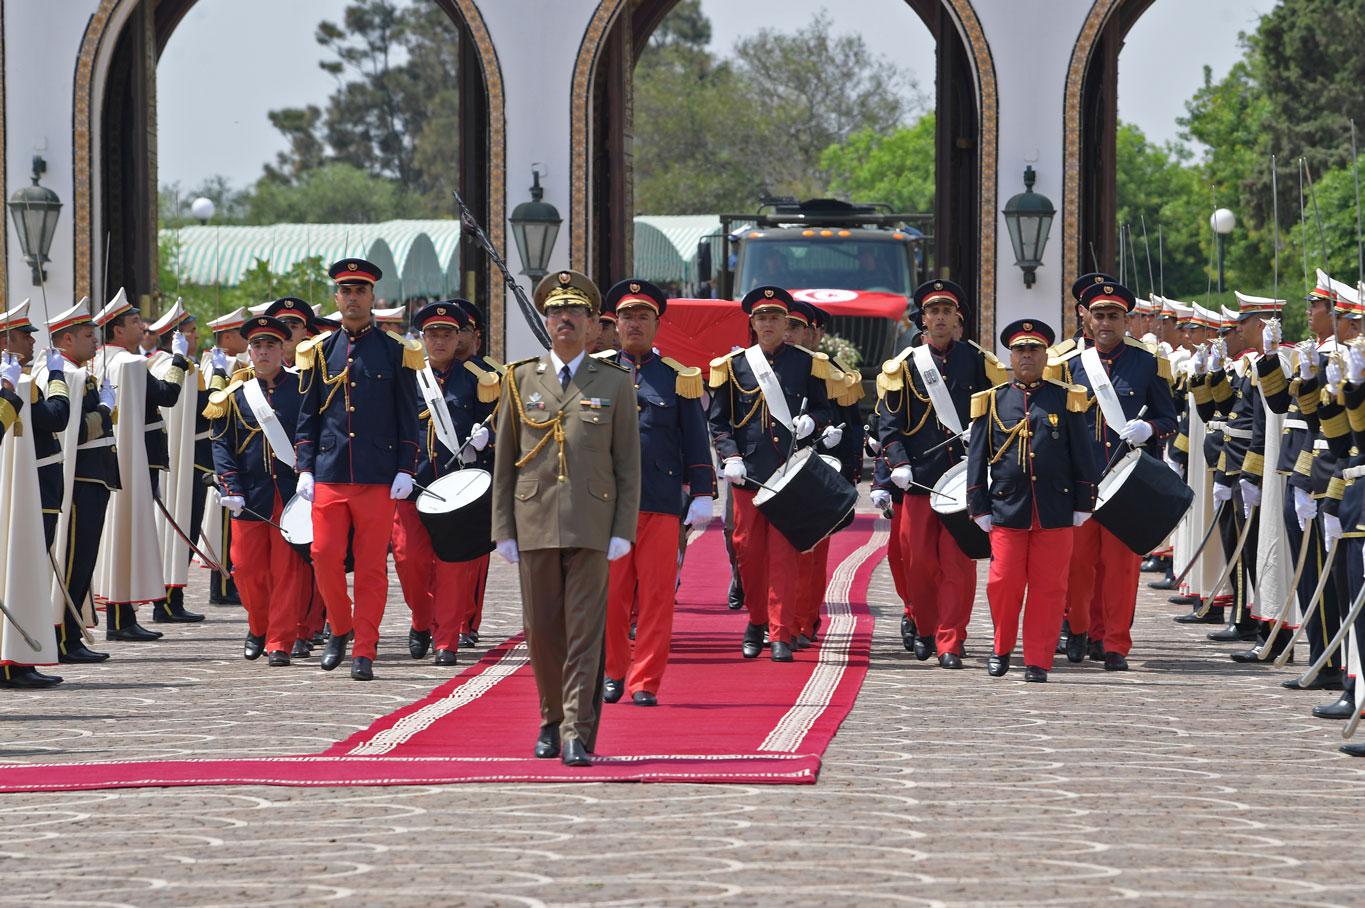 A military band performs during the state funeral of late President Beji Caid Essebsi